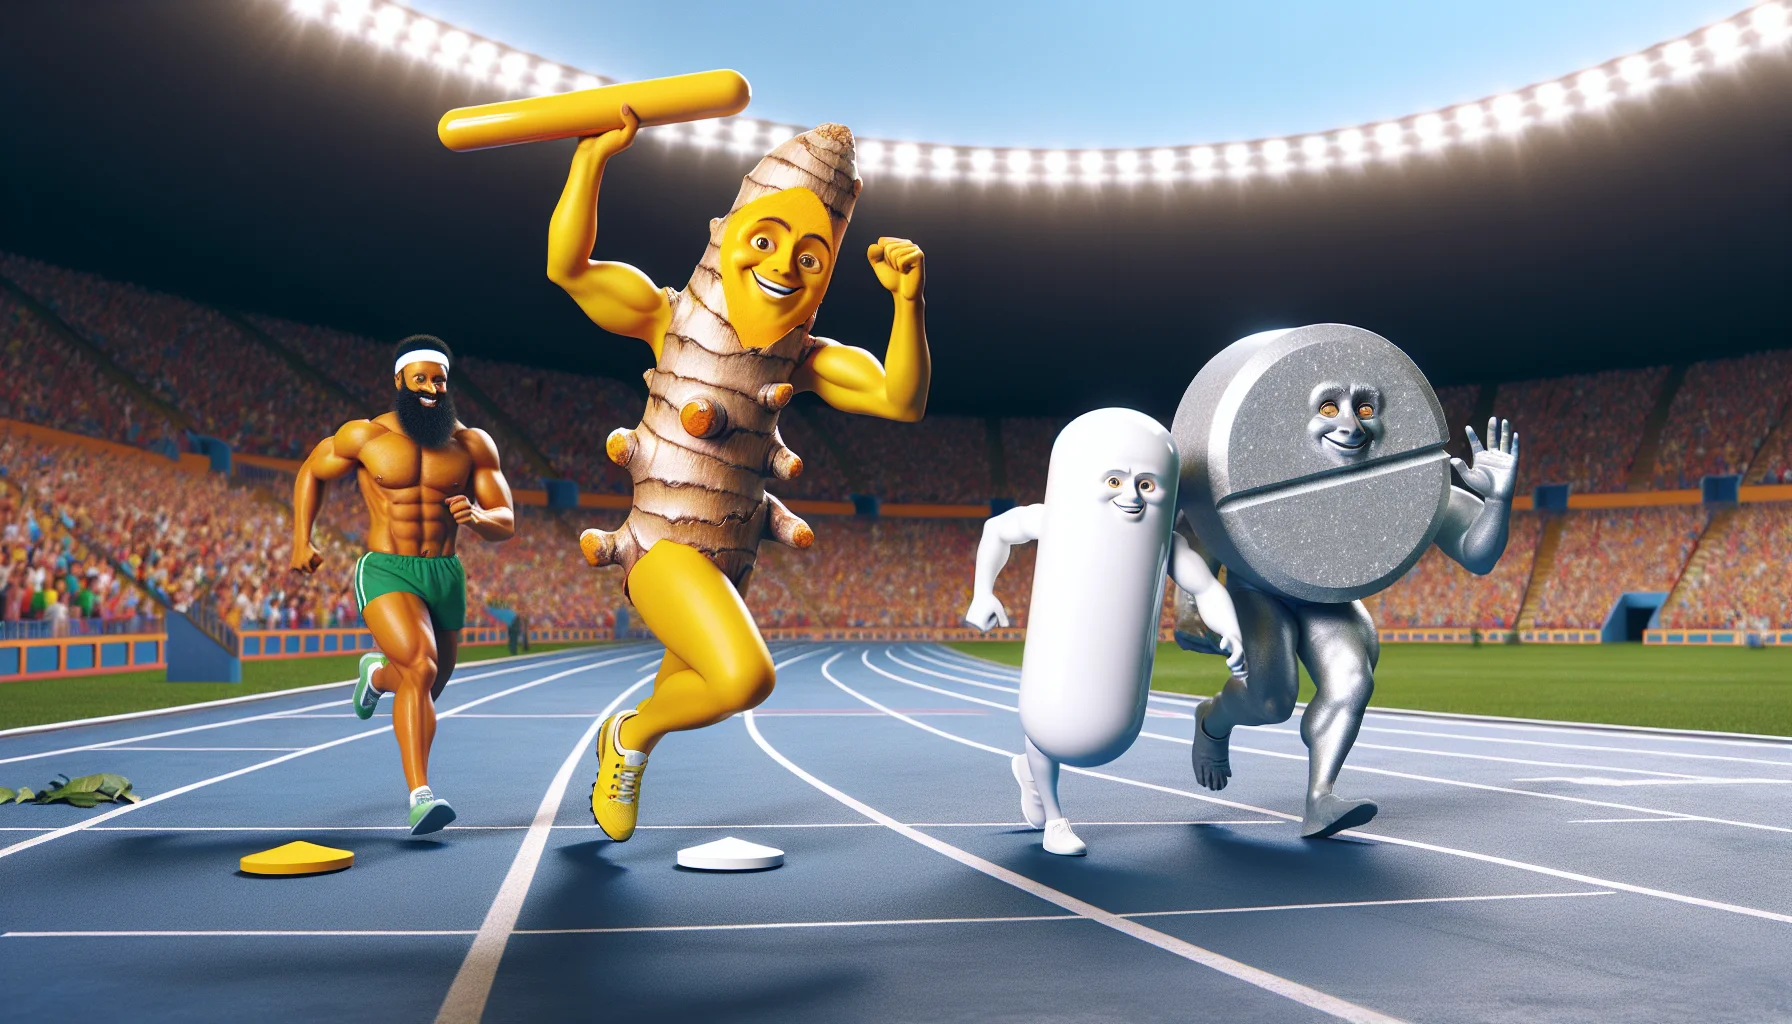 Imagine a humorous scene set on a sports field, where turmeric root, a vitamin D pill, and a magnesium pill are personified as athletes. The turmeric root, painted in radiant yellow, is sprinting in full speed with a forced smile, passing a baton to a white, glossy vitamin D pill in a relay race. The magnesium pill, depicted as silver-gray and burly, is preparing for a shot put, conveying a look of pure determination. A variety of spectators in the stands is cheering enthusiastically at their high energy performance, subtly encouraging the use of supplements for sports enhancement.